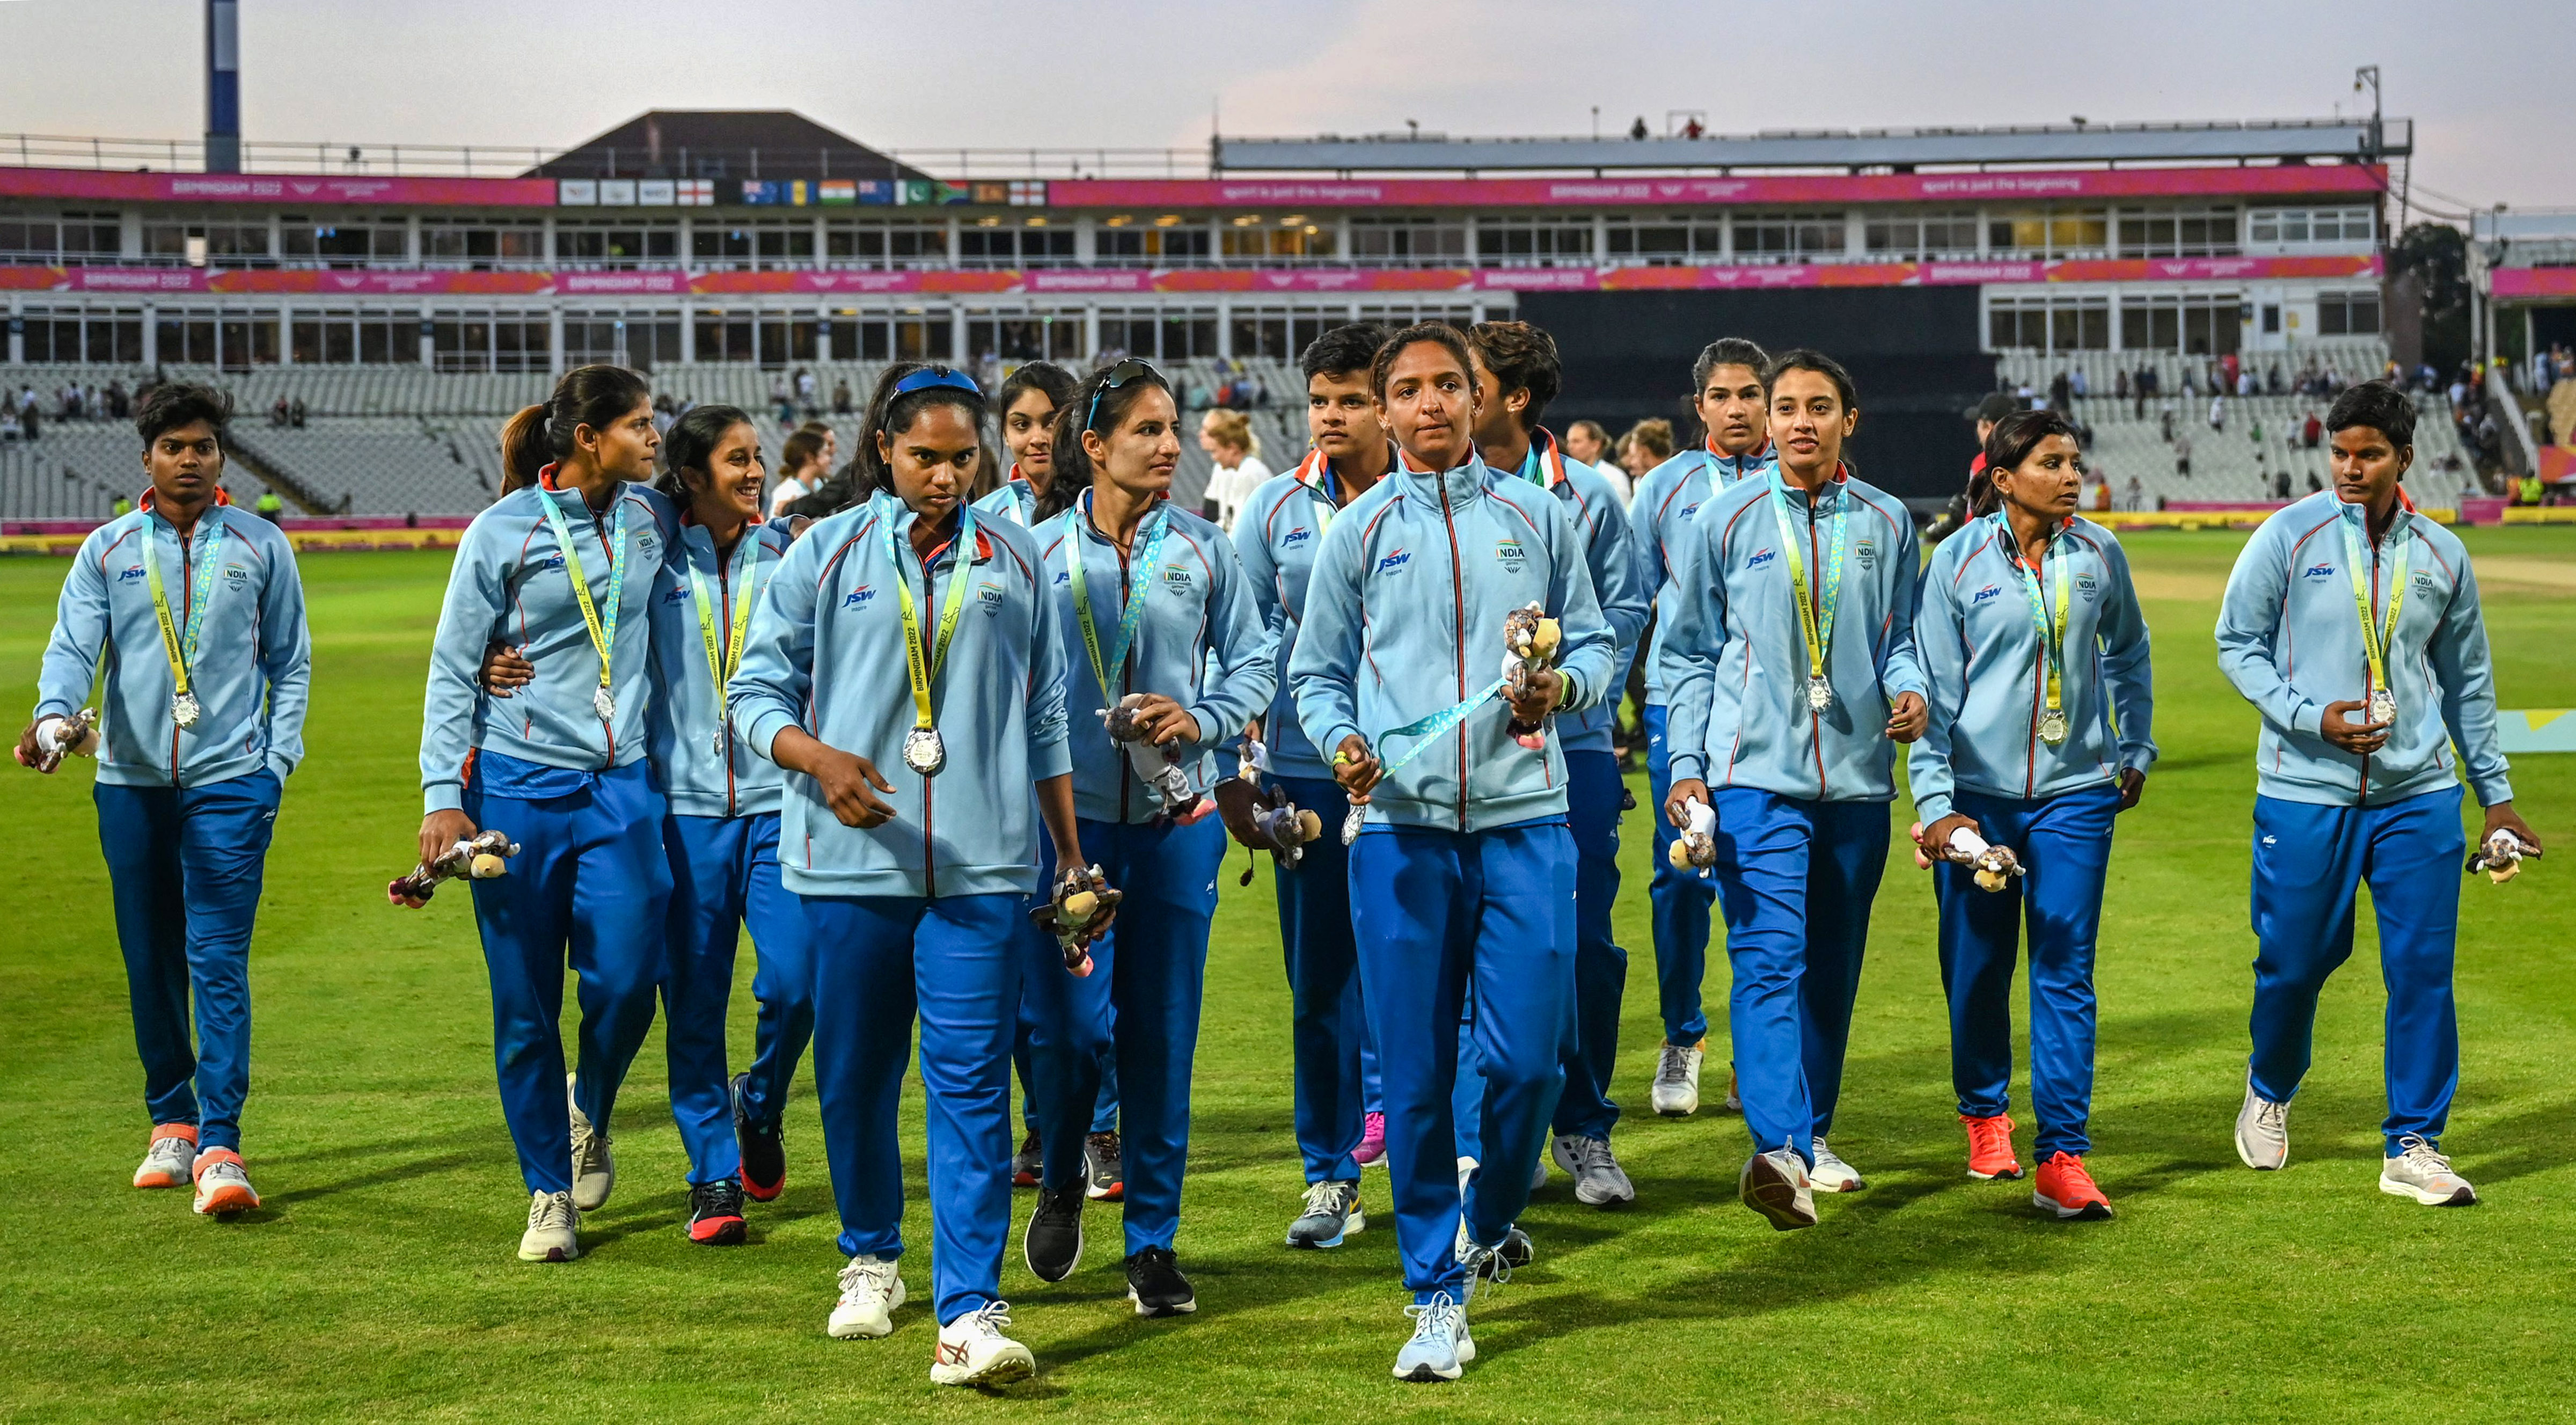 pay-equity-bcci-announces-equal-match-fee-for-men-women-cricketers